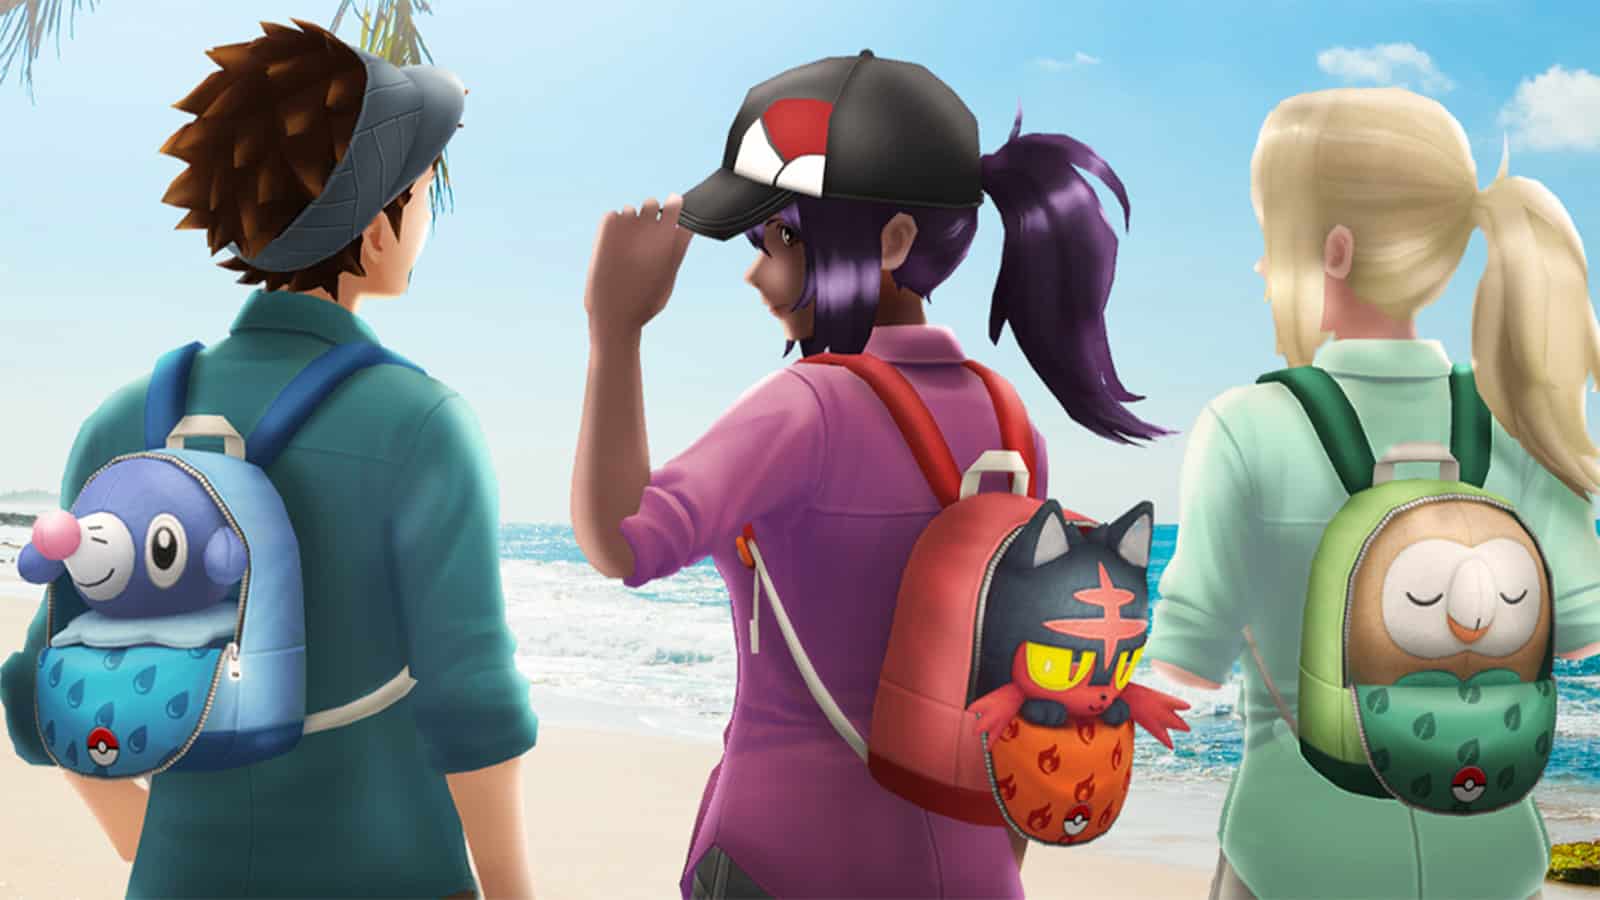 Take a Different Kind of Alola Island Challenge with the Alola